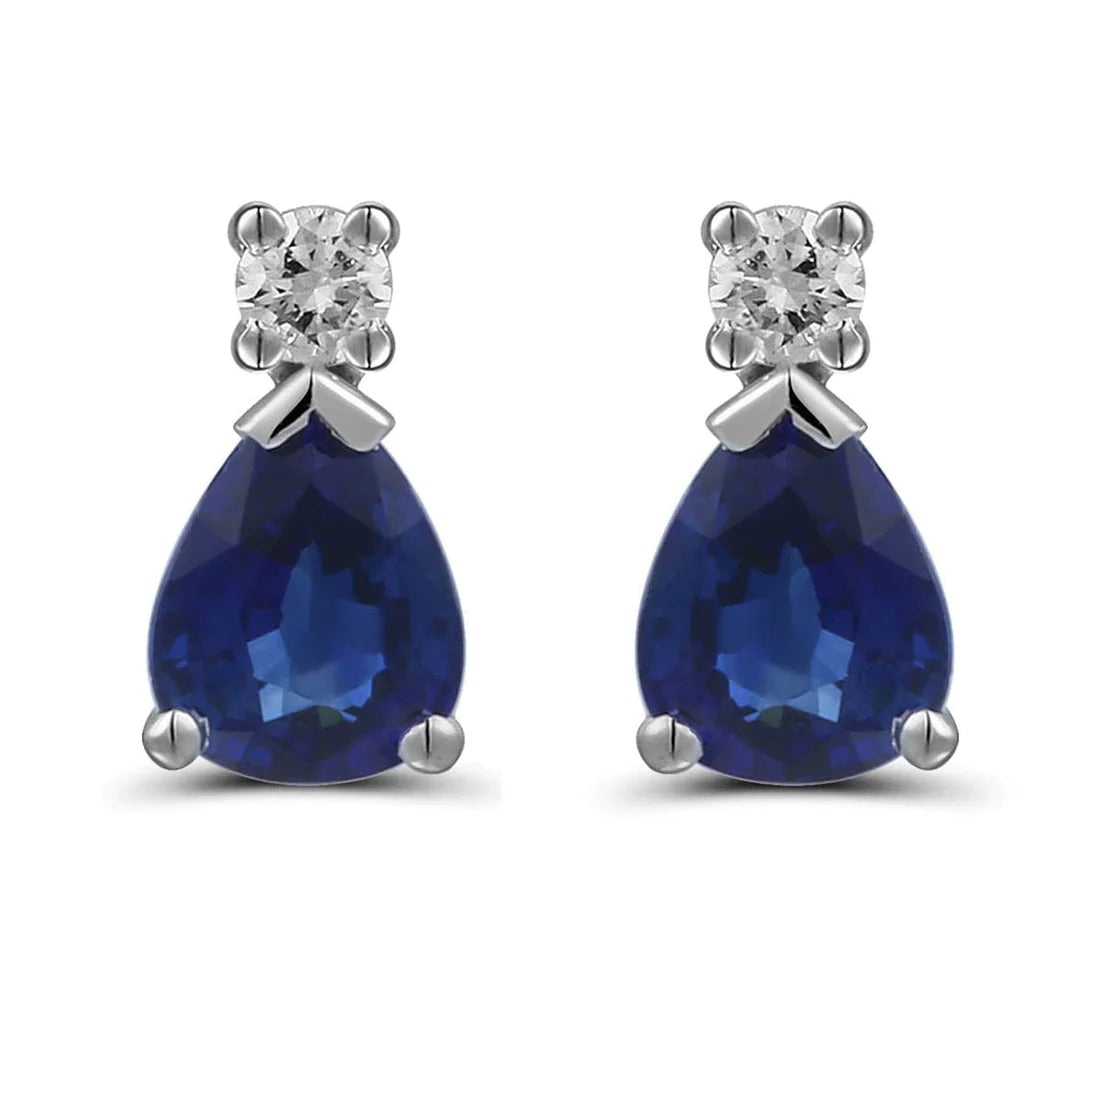 18ct White Gold 0.74ct Pear Cut Blue Sapphire And 0.06ct Round Brilliant Cut Diamond Drop Earrings